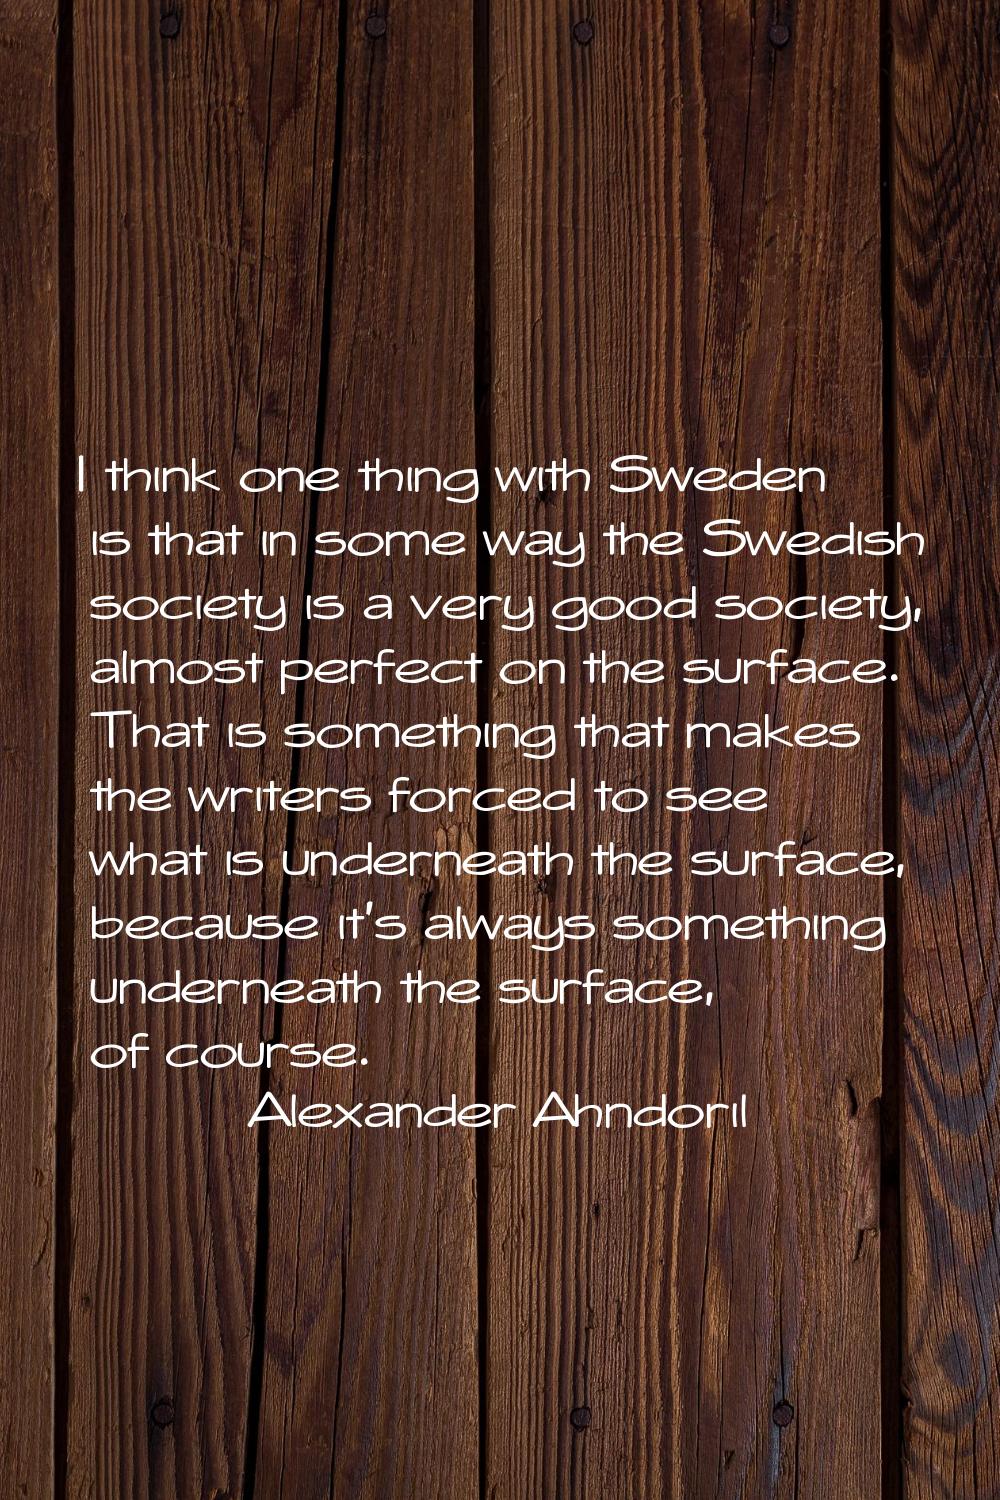 I think one thing with Sweden is that in some way the Swedish society is a very good society, almos